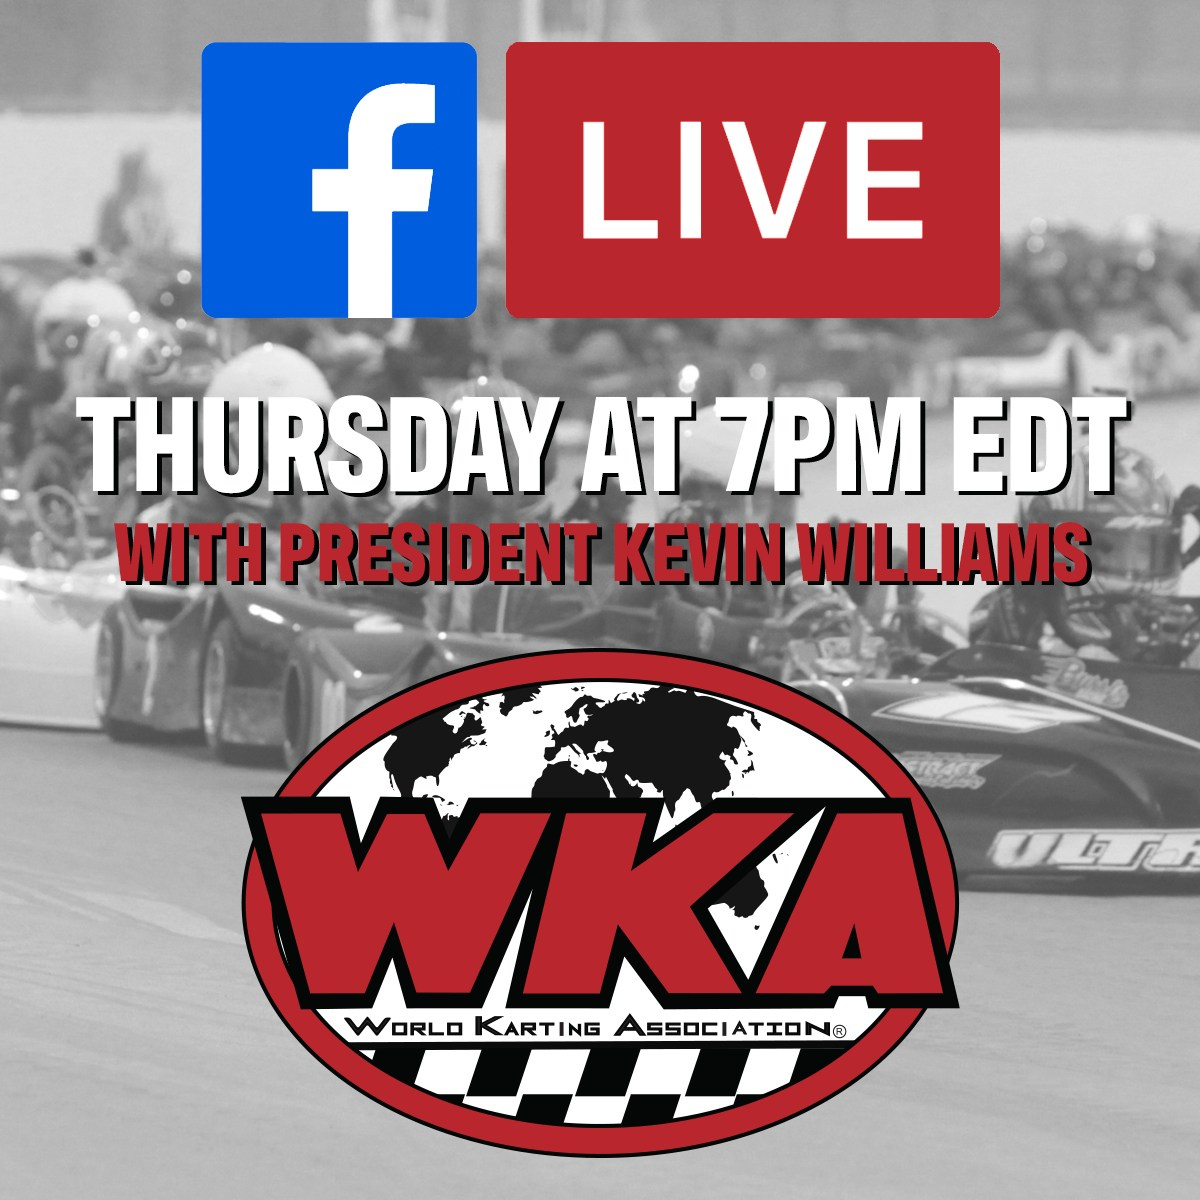 Set a reminder for tomorrow's 3rd Thursdays Facebook Live with WKA President Kevin Williams. Come join in the conversation! #WKA #WorldKarting #WorldKartingAssociation #Karting #Kart #Racing #Motorsport #LetsGoKarting #Facebook #FacebookLive